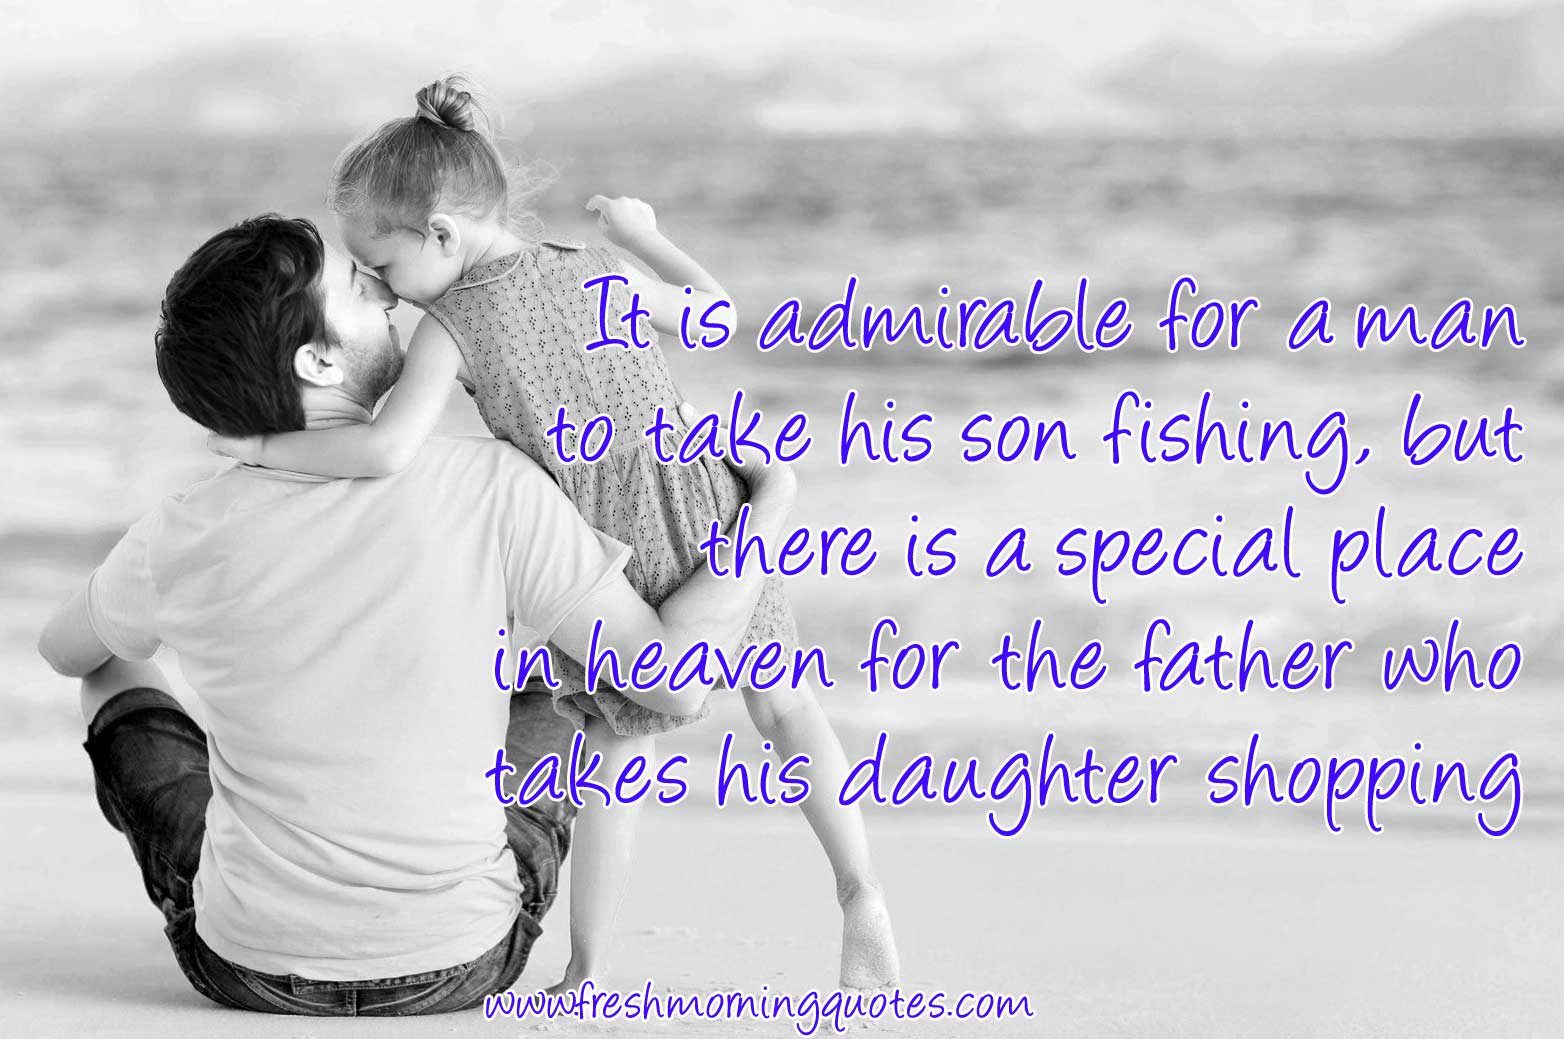 50 Sweetest Father Daughter Quotes with Images